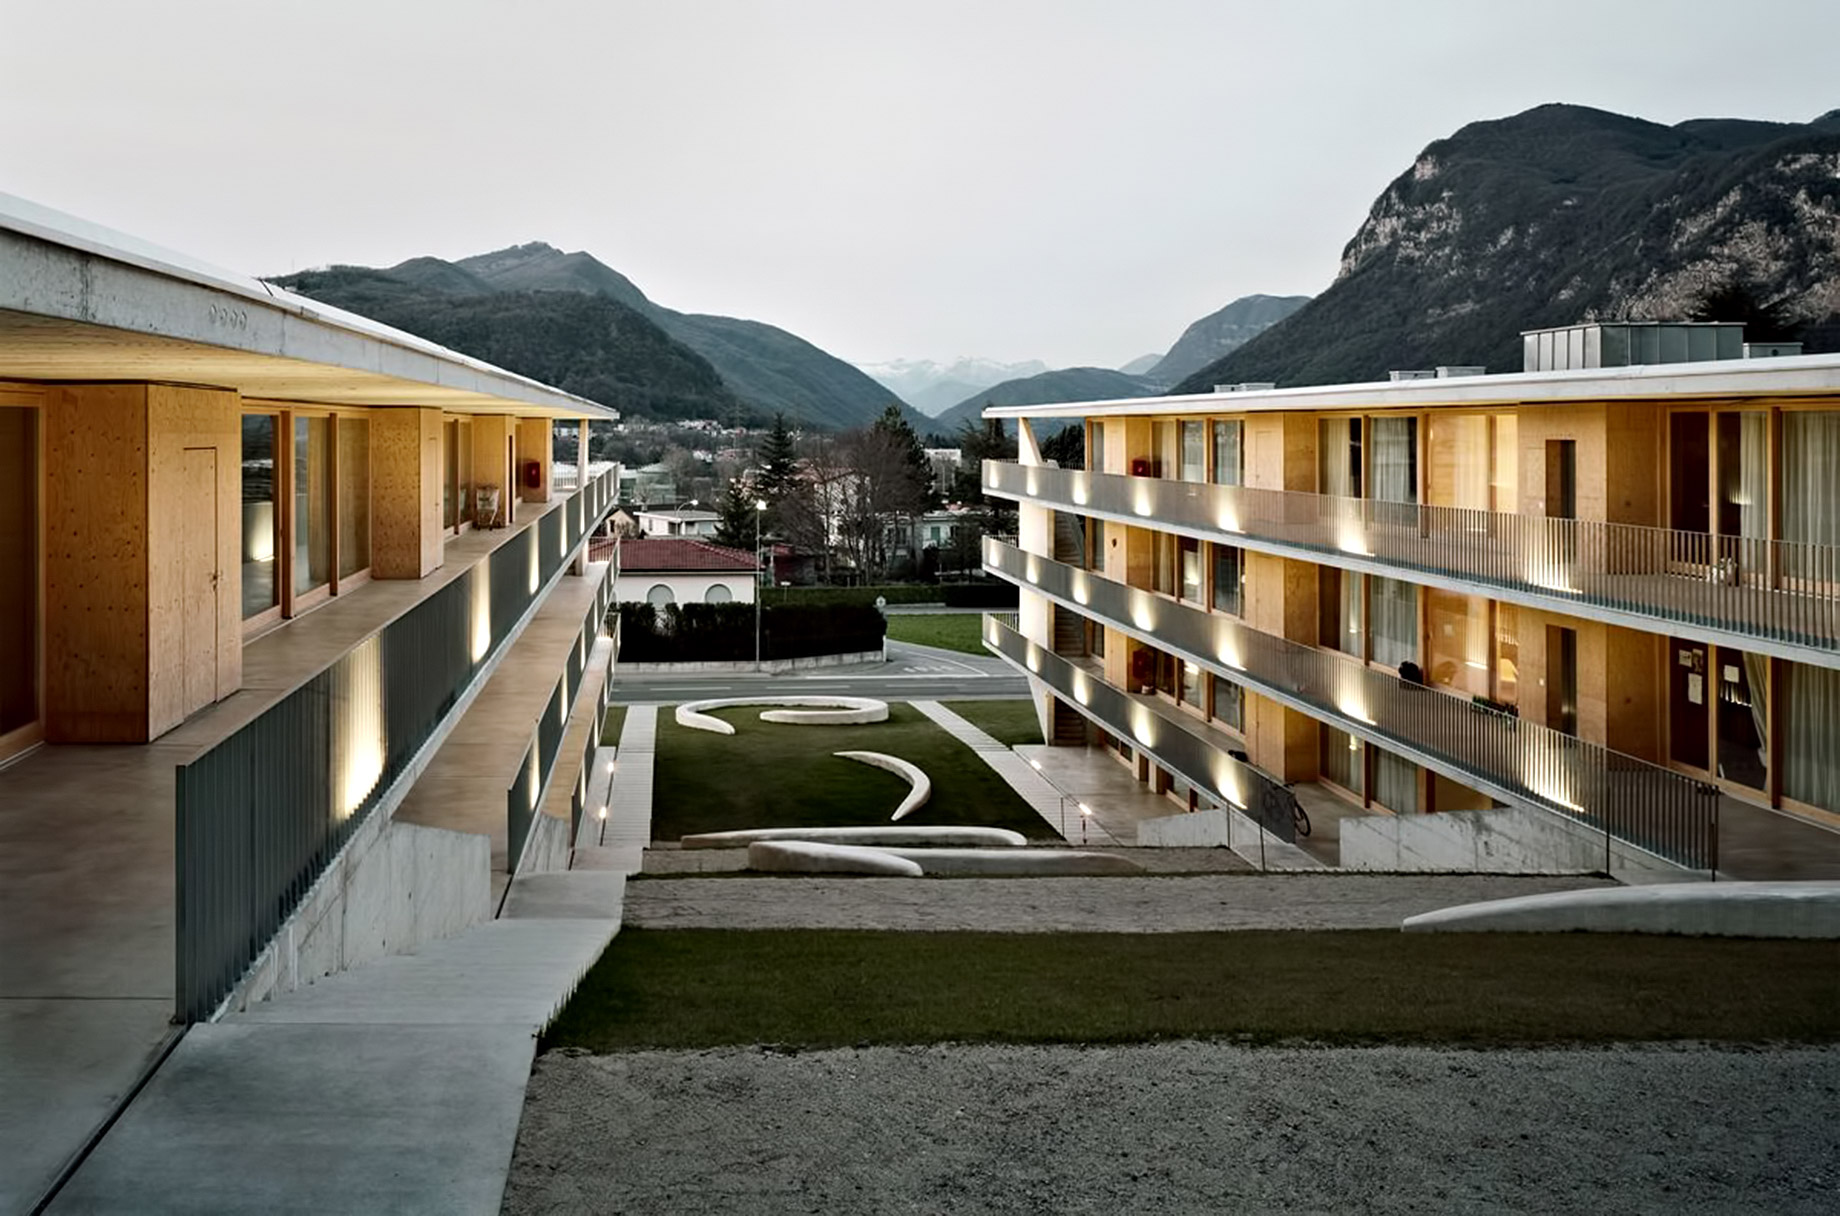 Casa dell’Accademia in Switzerland - Student Housing in the Swiss Alps